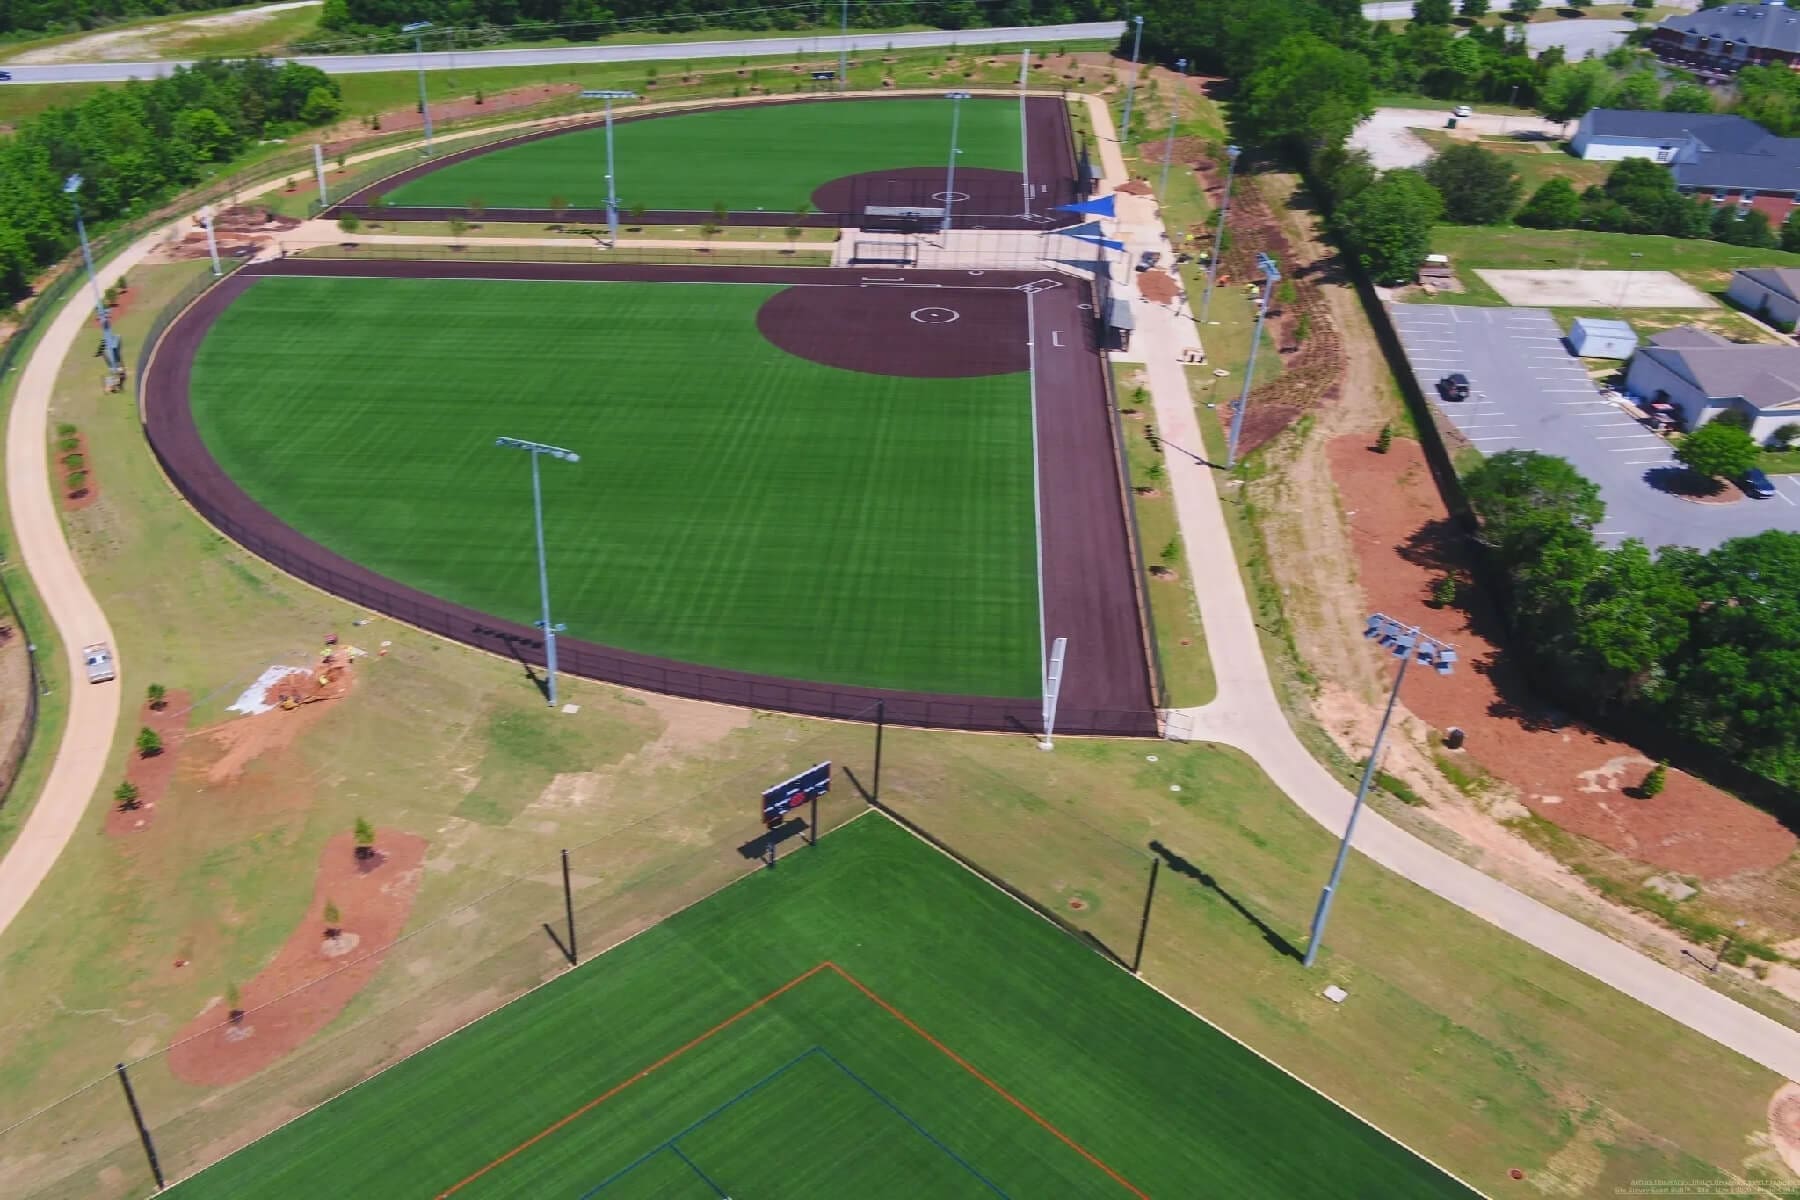 A baseball field with green grass and purple turf.